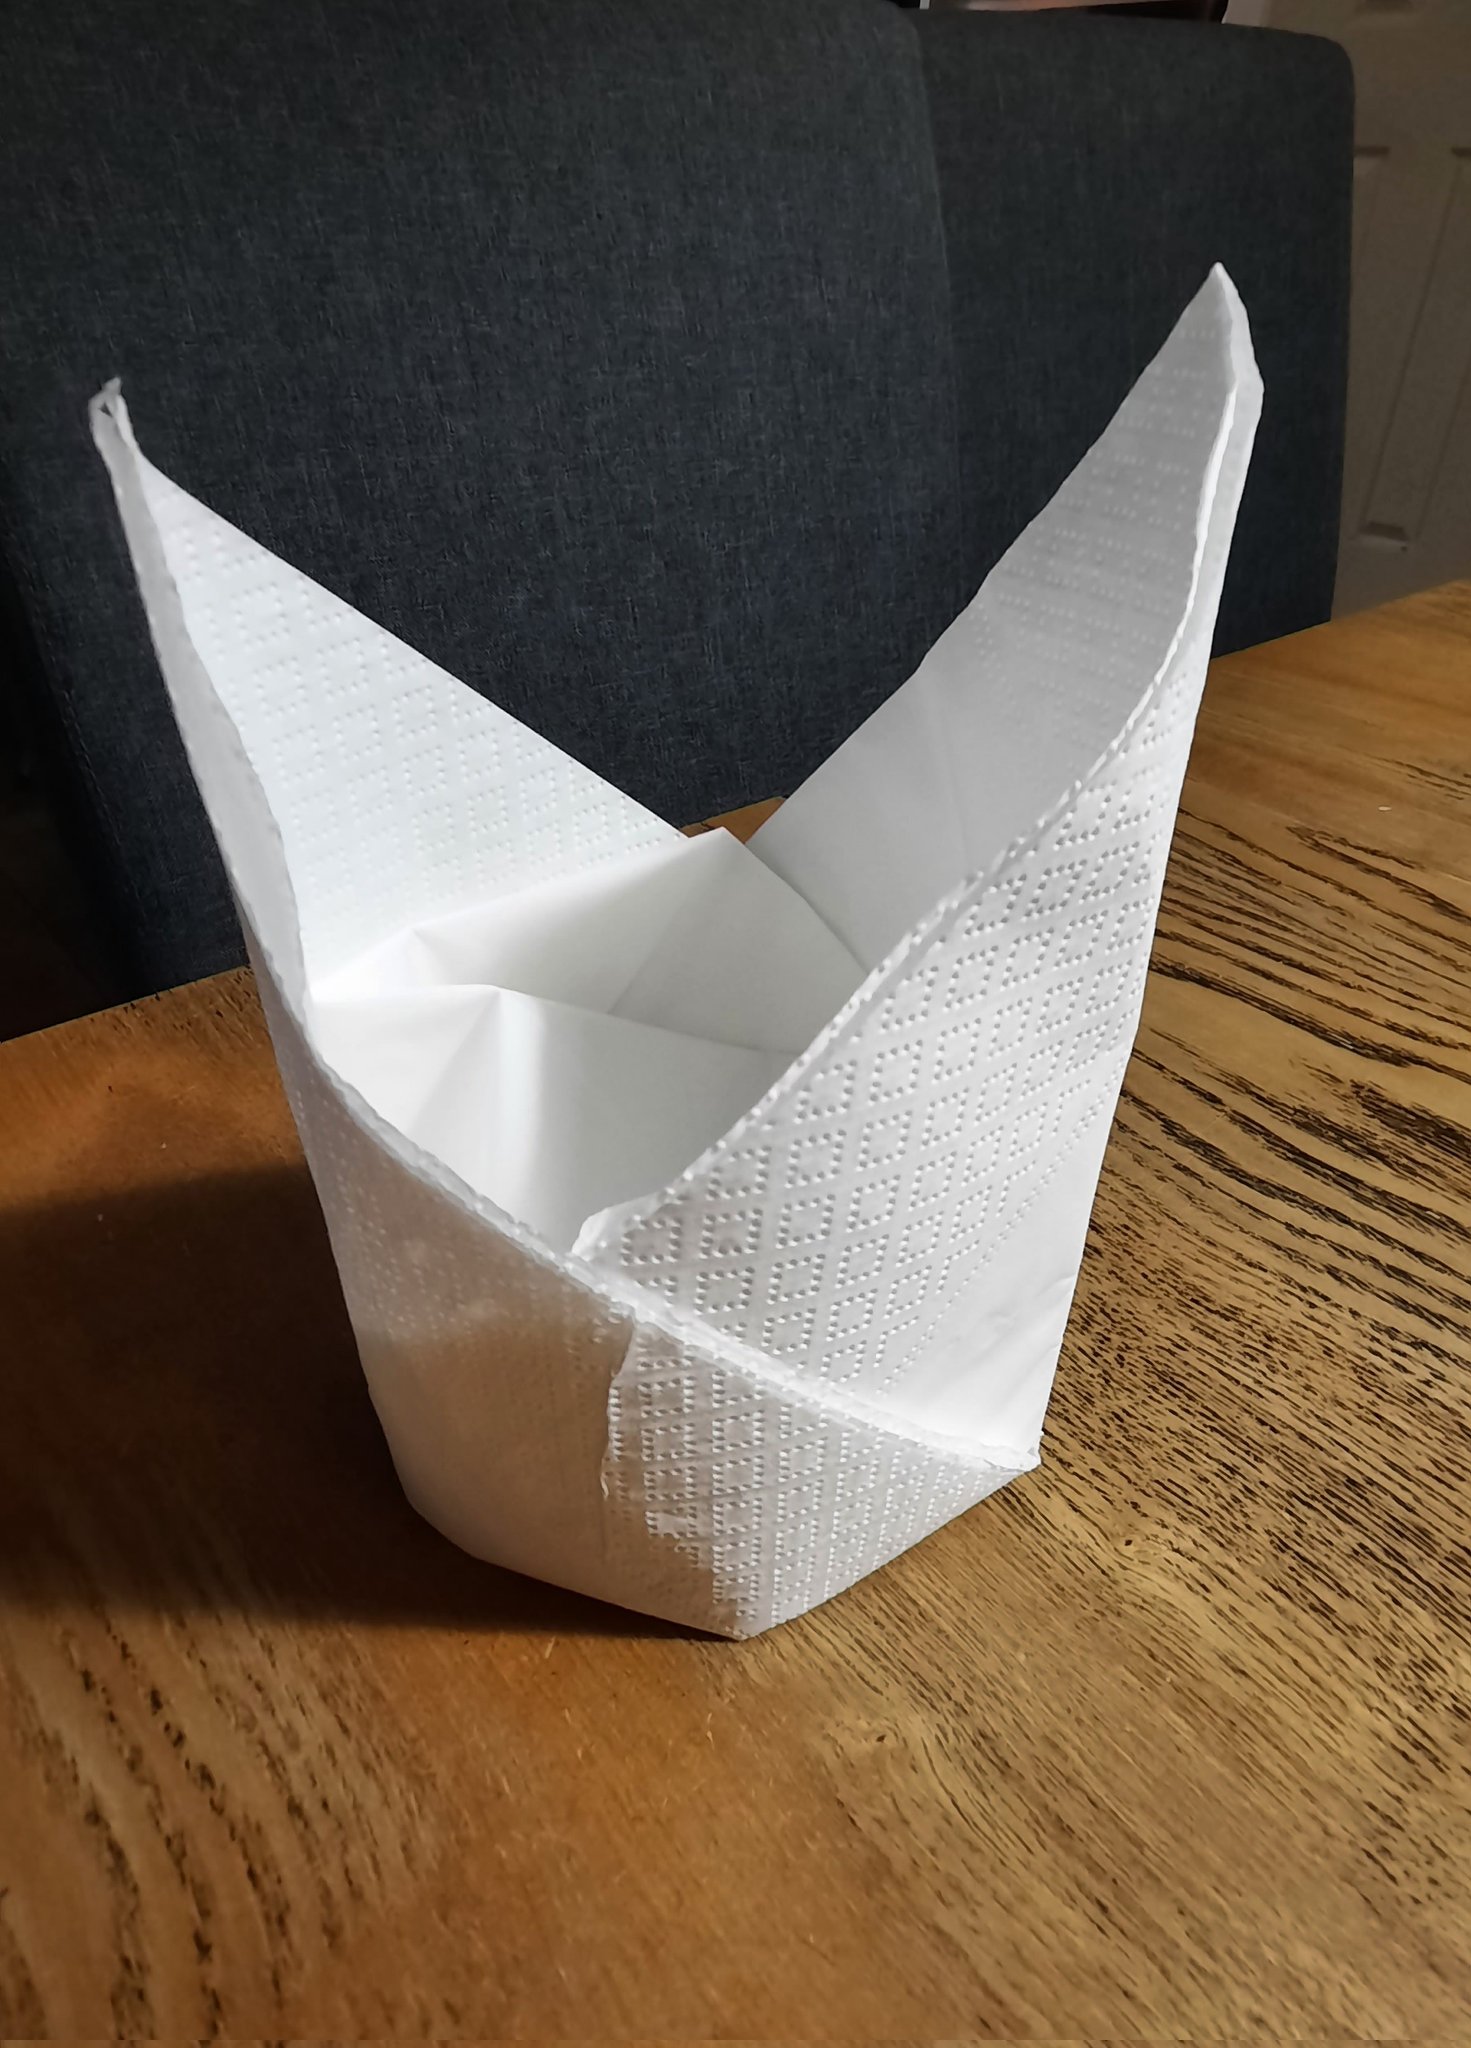 Allayne Webster on Twitter: "I present the pride of my 80's skillset: Napkin Crown 👑 As a 16 y.o. waitress, I folded approx 30 gazillion. Also: The Fan and The Swan -